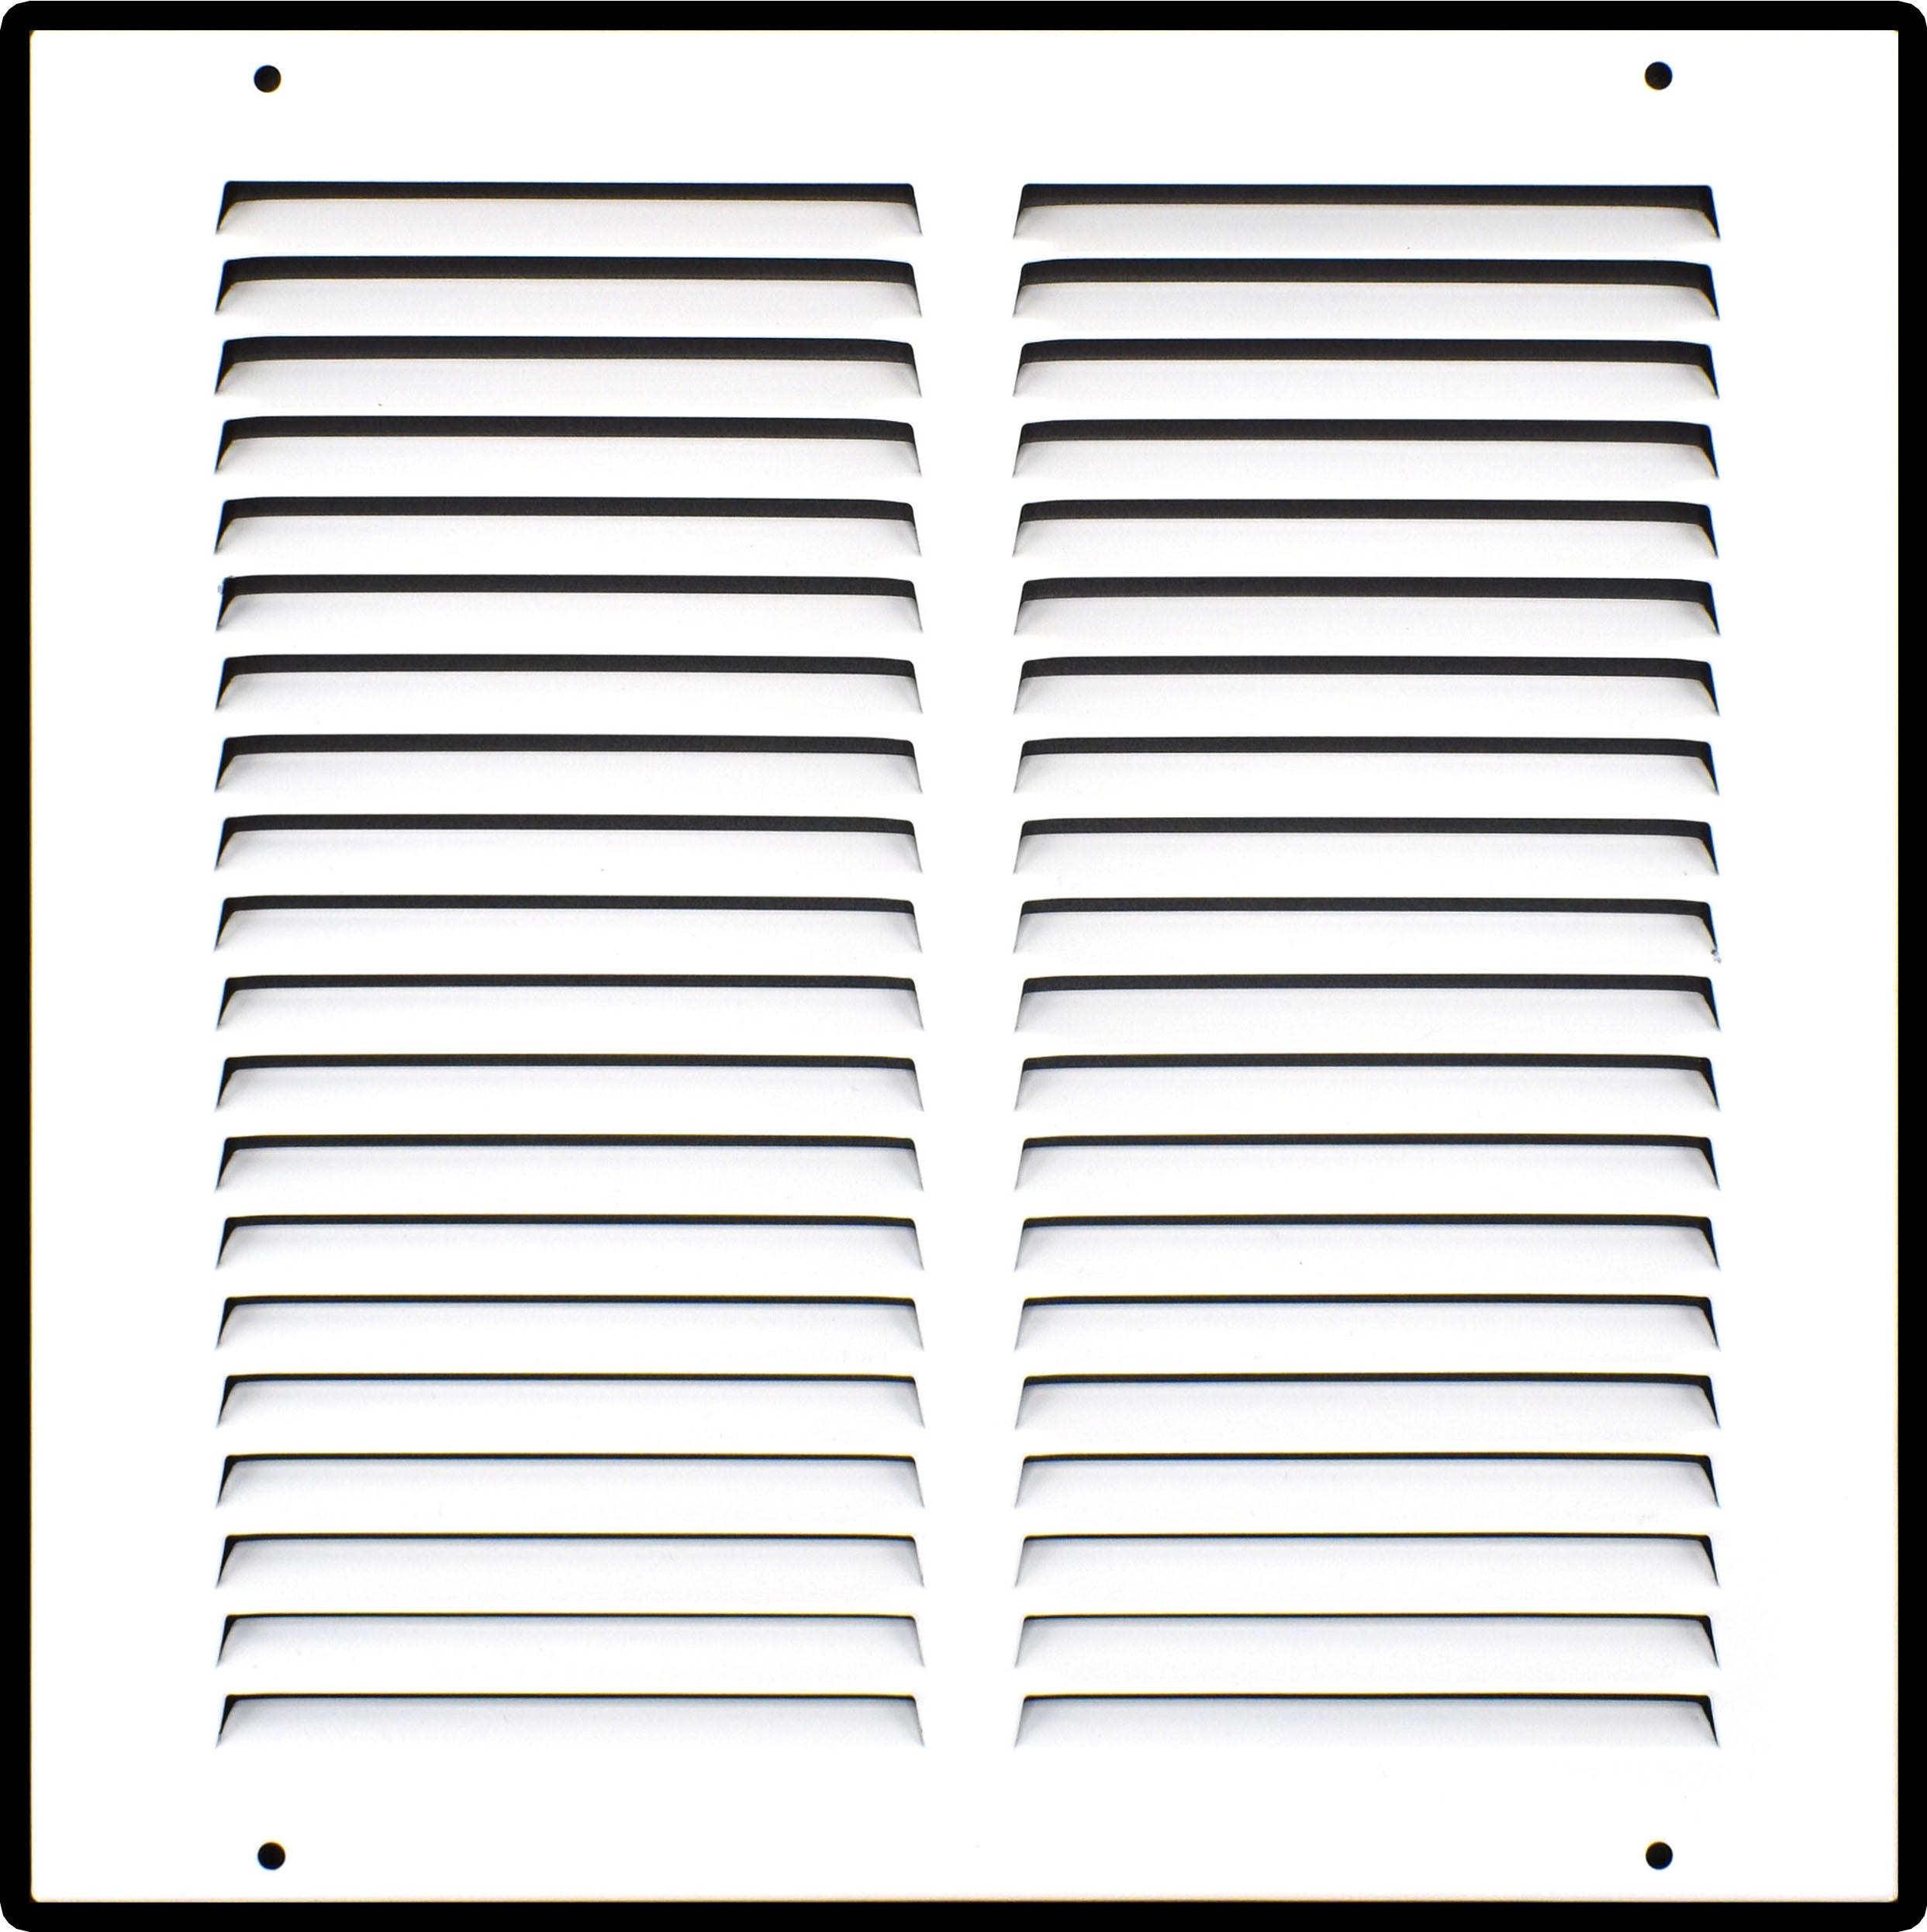 airgrilles 10" x 10" duct opening - hd steel return air grille for sidewall and ceiling 7hnd-flt-rg-wh-10x10 038775640626 - 1